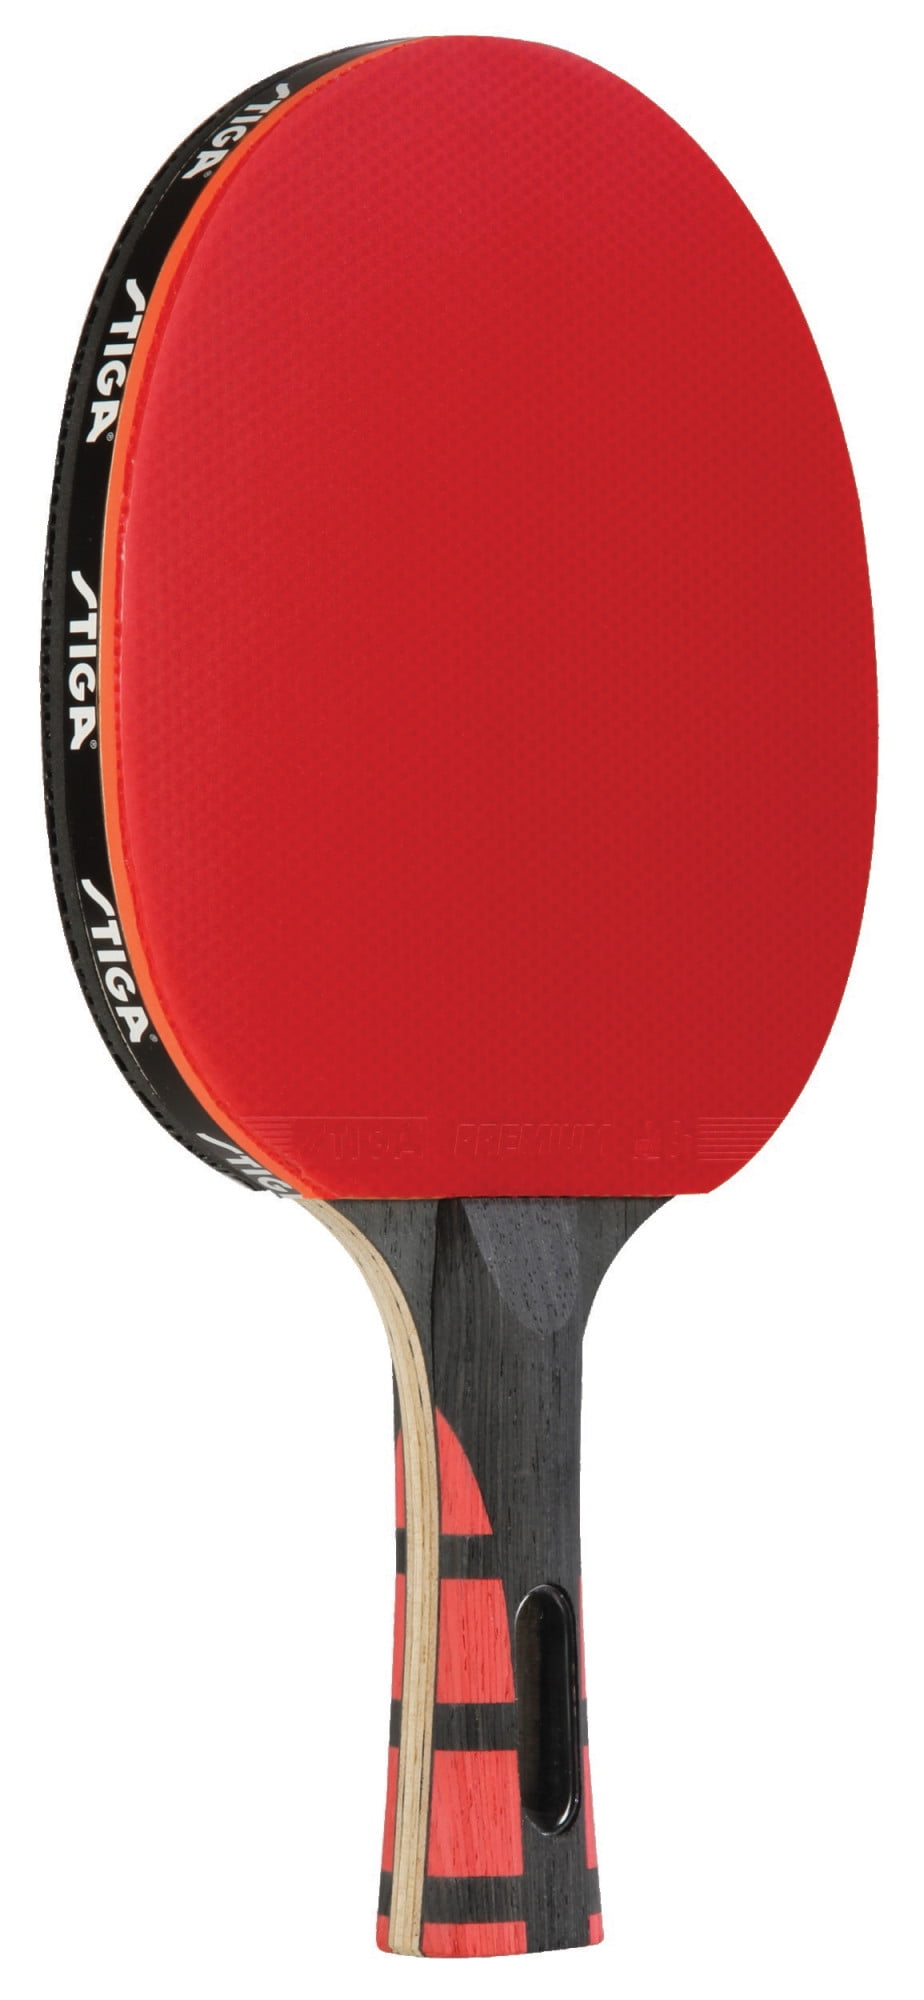 Details about   Stiga Evolution Performance-Level Table Tennis Racket Made With Approved Rubber 